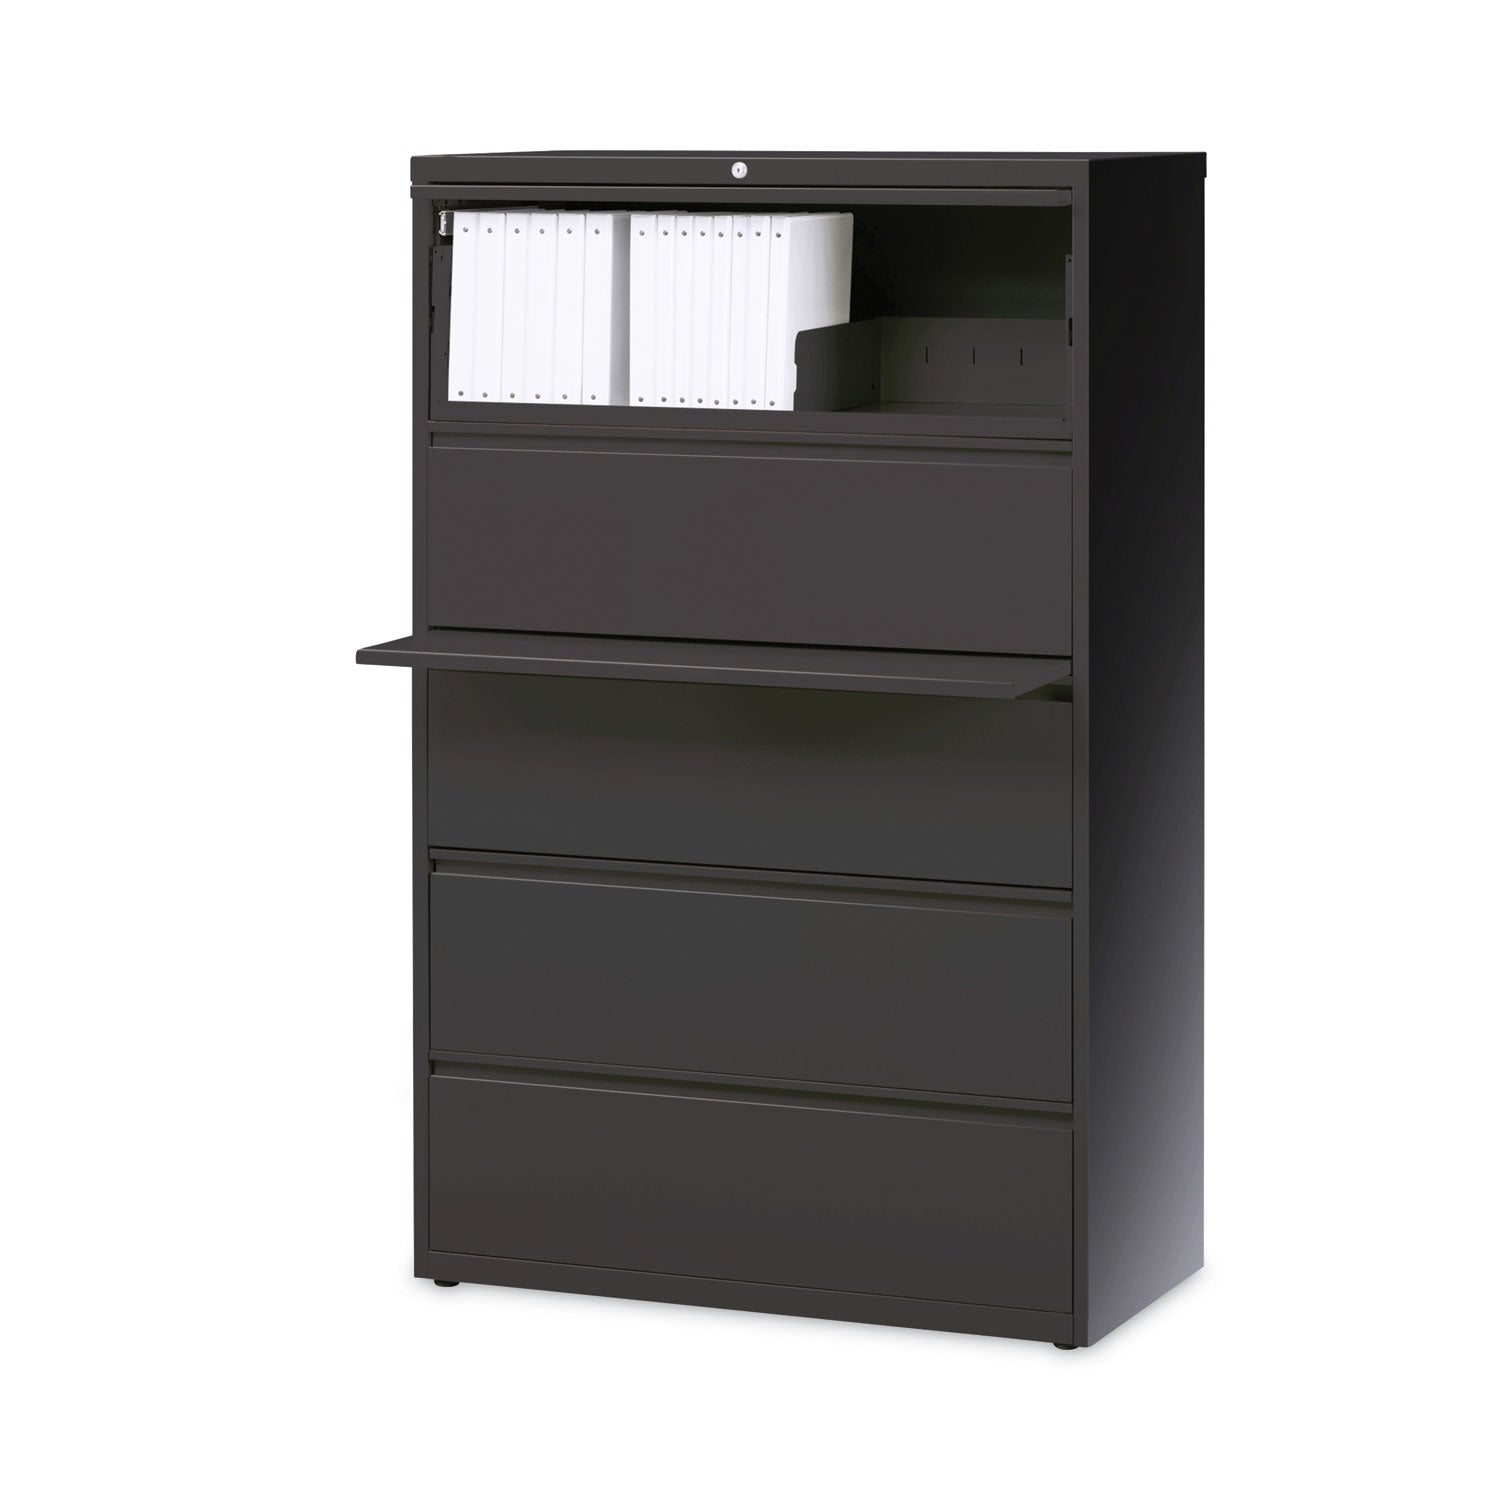 lateral-file-cabinet-5-letter-legal-a4-size-file-drawers-charcoal-36-x-1862-x-6762_hid16068 - 1